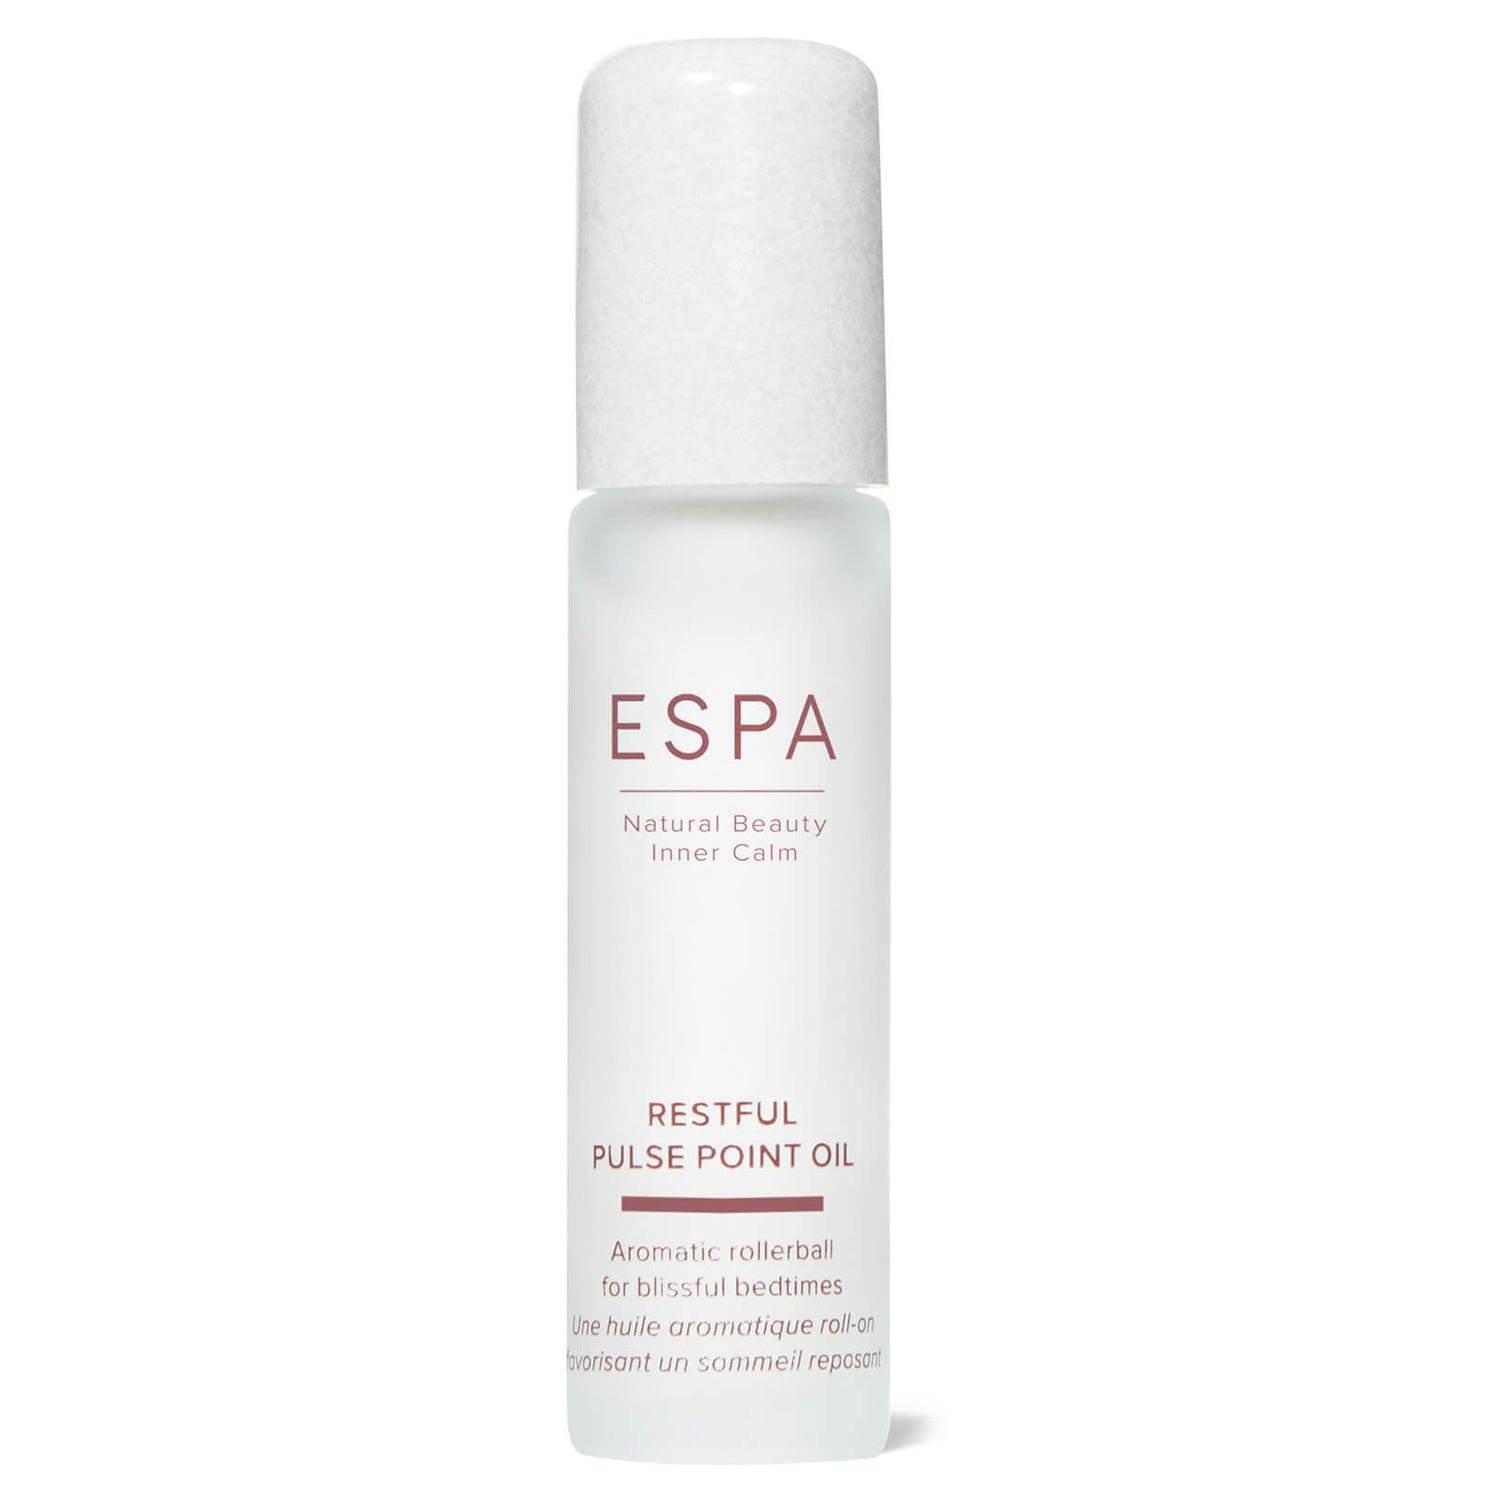 ESPA Restful Pulse Point Rollerball 9ml